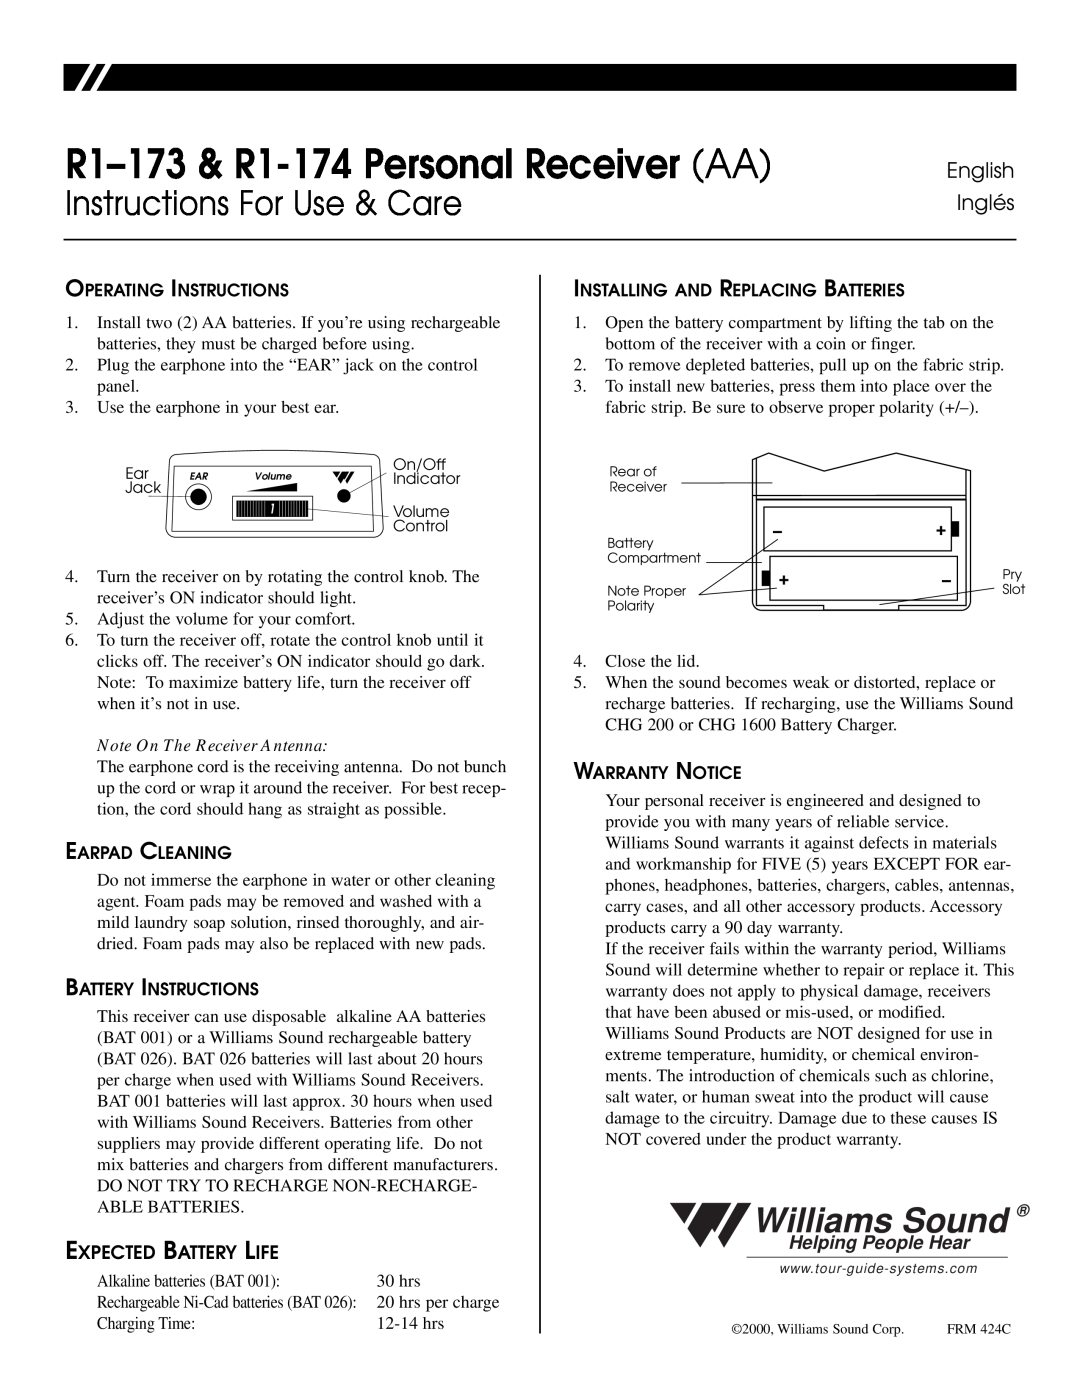 Williams Sound R1-173, R1-174 warranty Williams Sound, Instructions For Use & Care, English Inglés, Expected Battery Life 